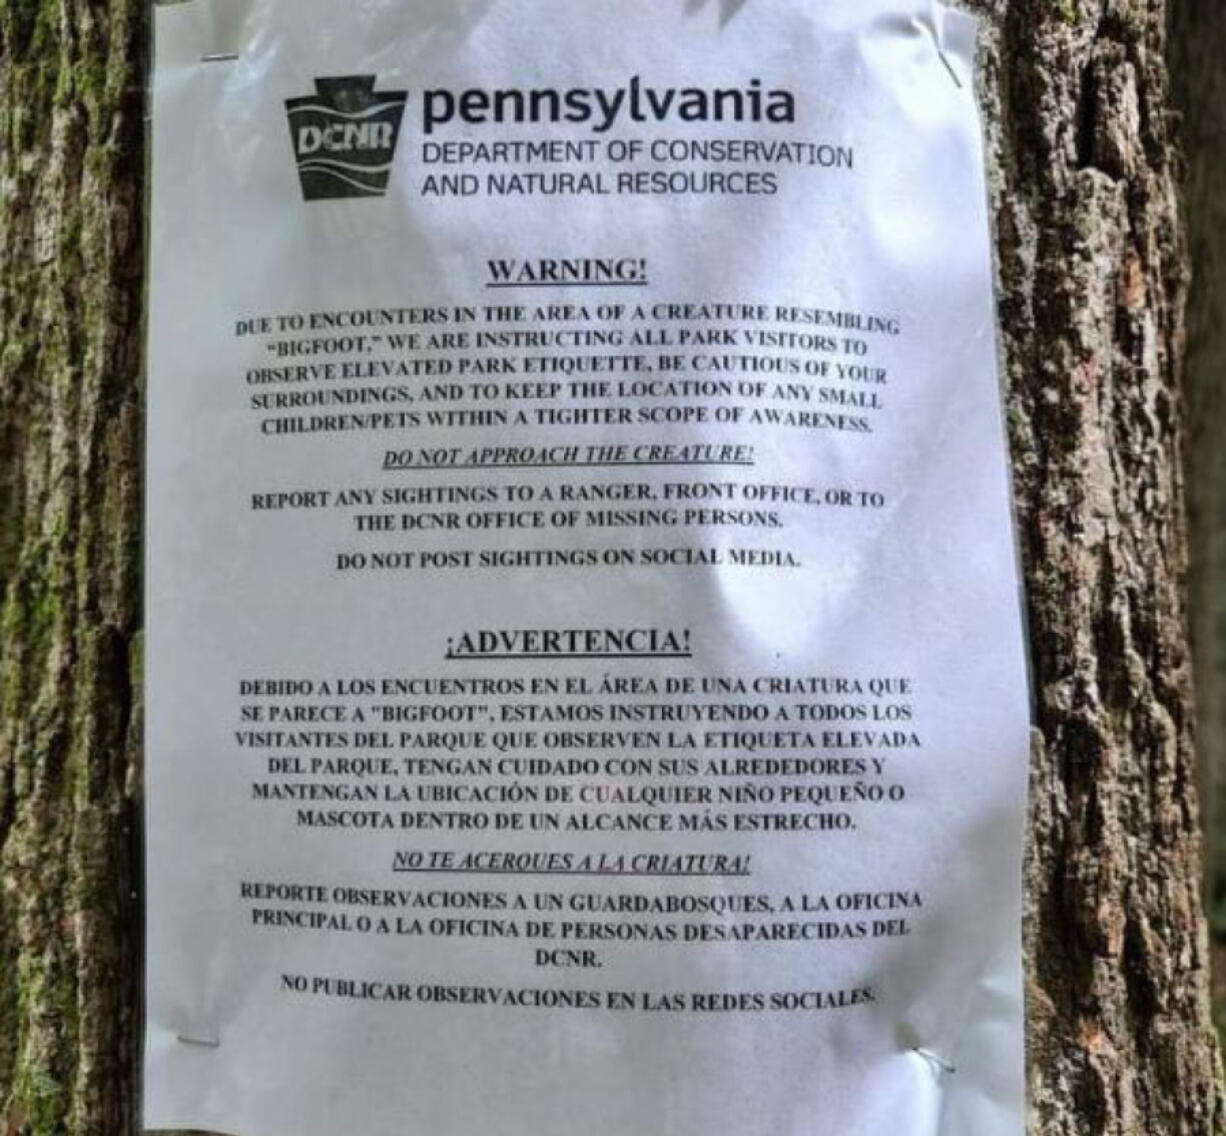 A photo posted on Reddit over the summer purports to show a sign warning residents of Bigfoot sightings in Pennsylvania state parks.